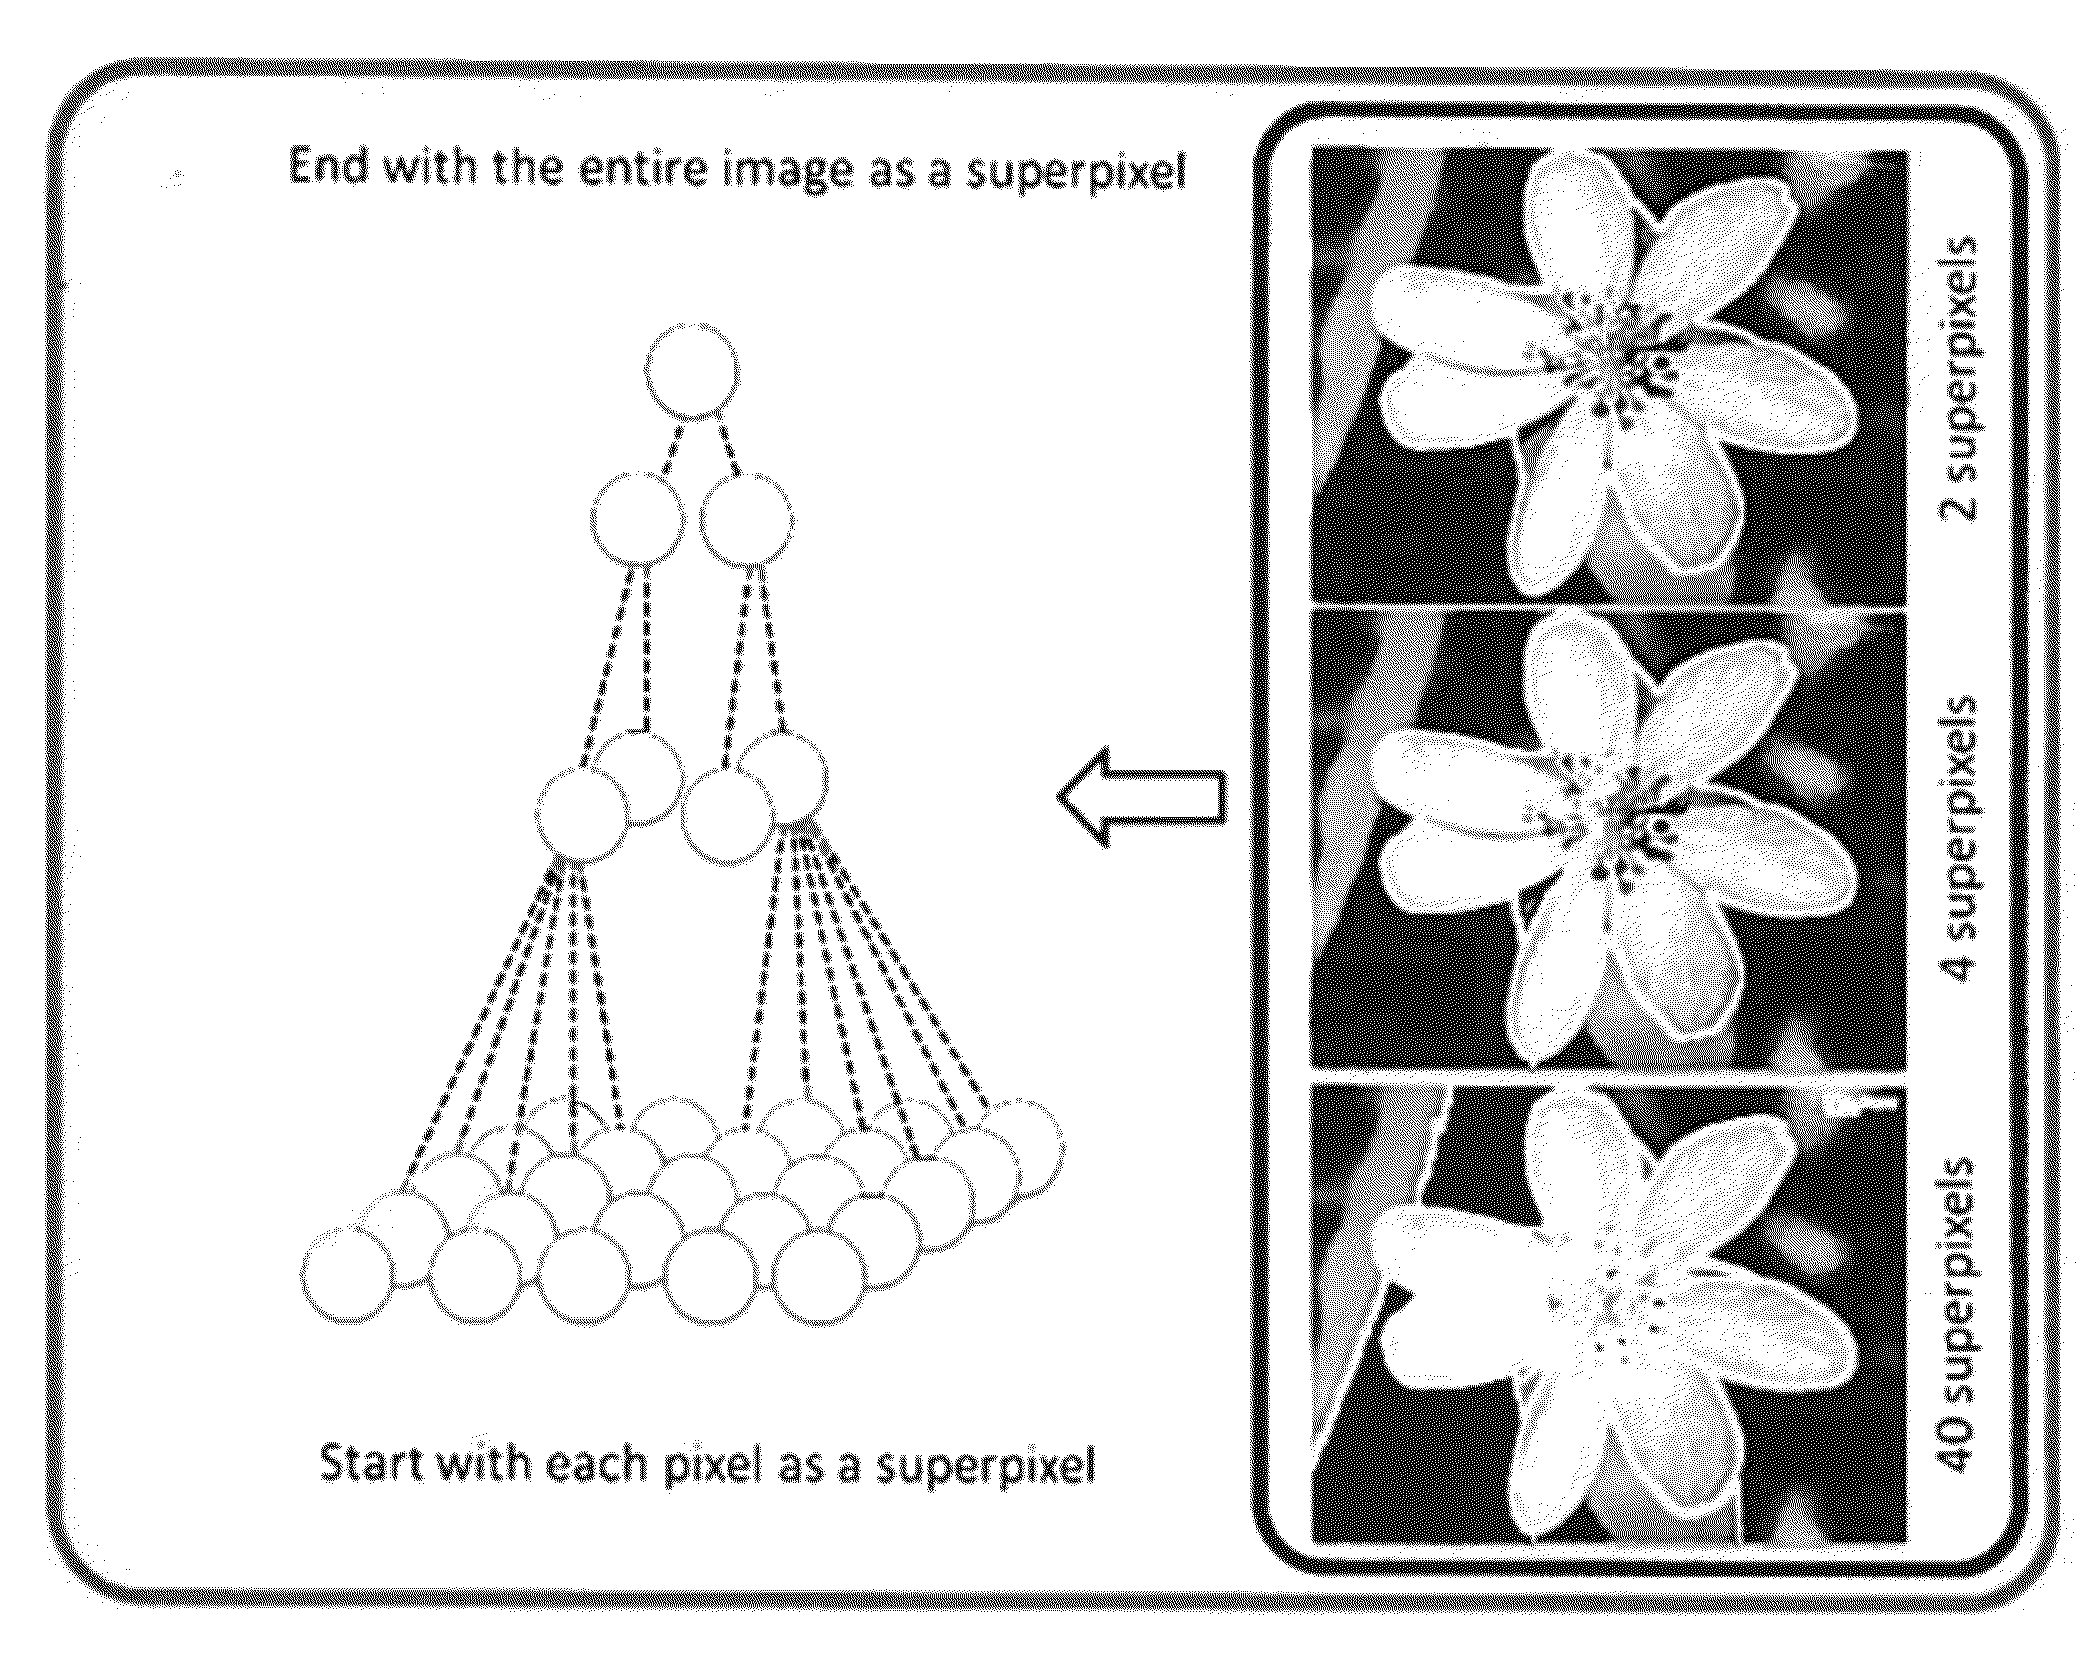 Method for Segmenting Images Using Superpixels and Entropy Rate Clustering